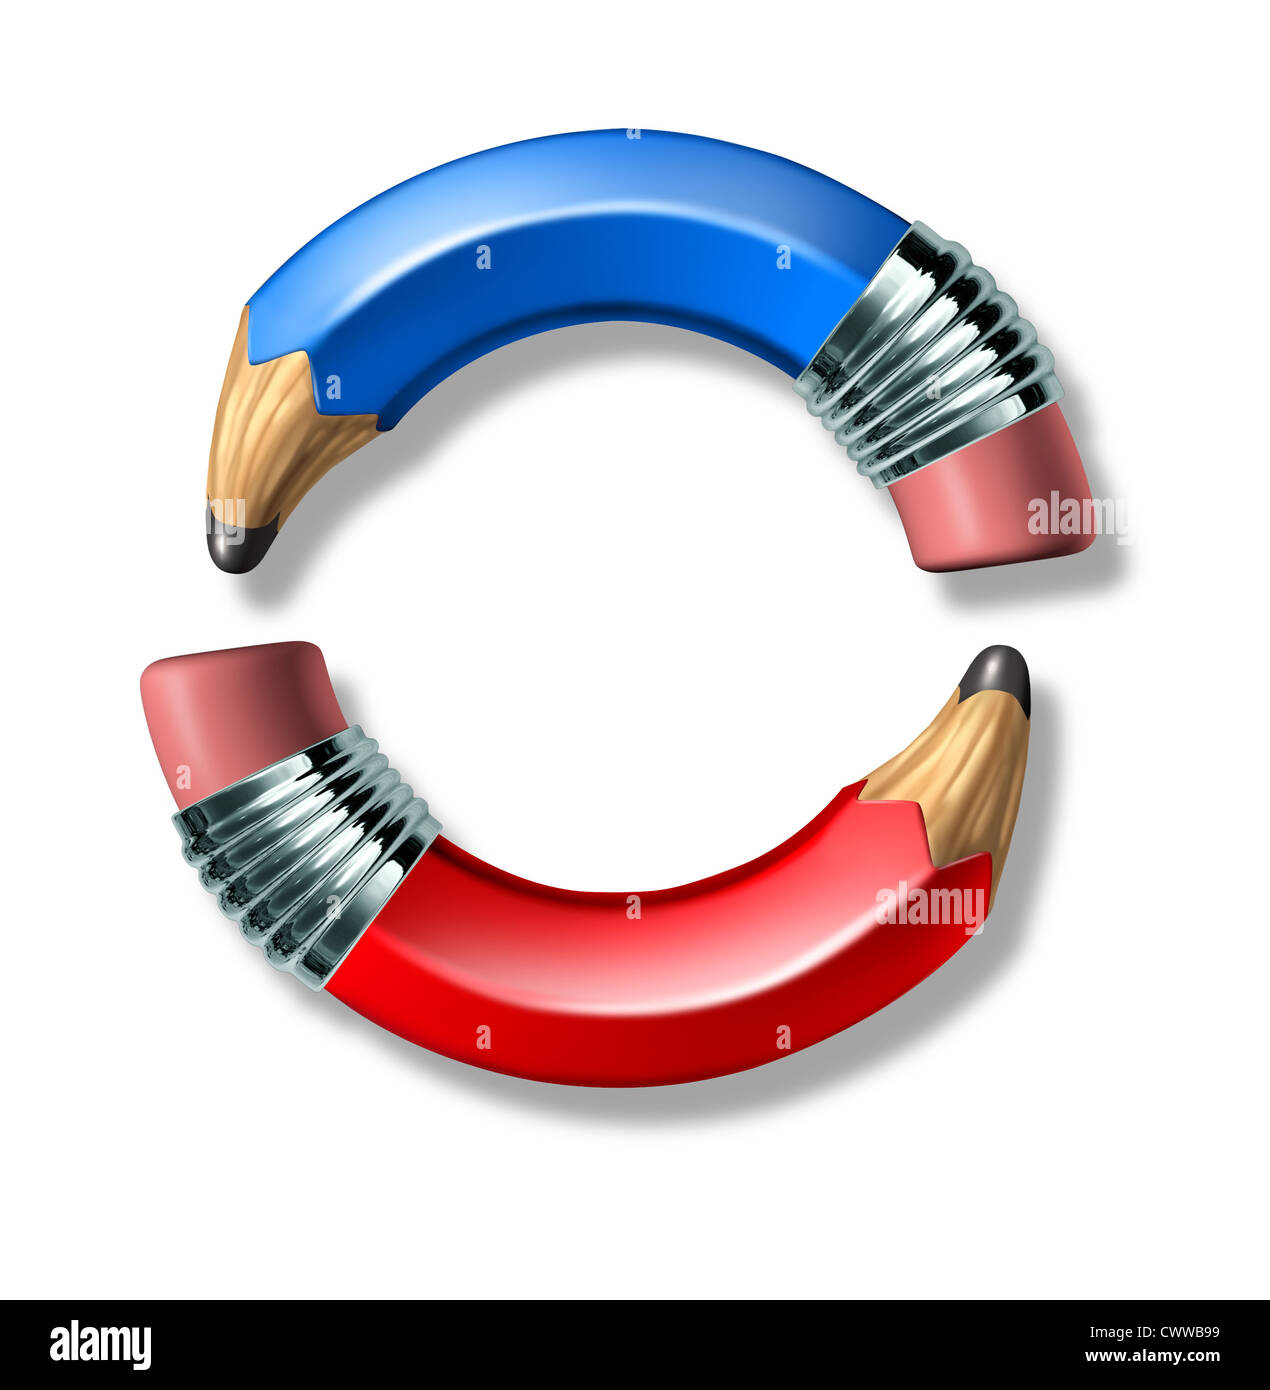 Blue and red curved pencil symbol representing politics and voting on a white background. Stock Photo